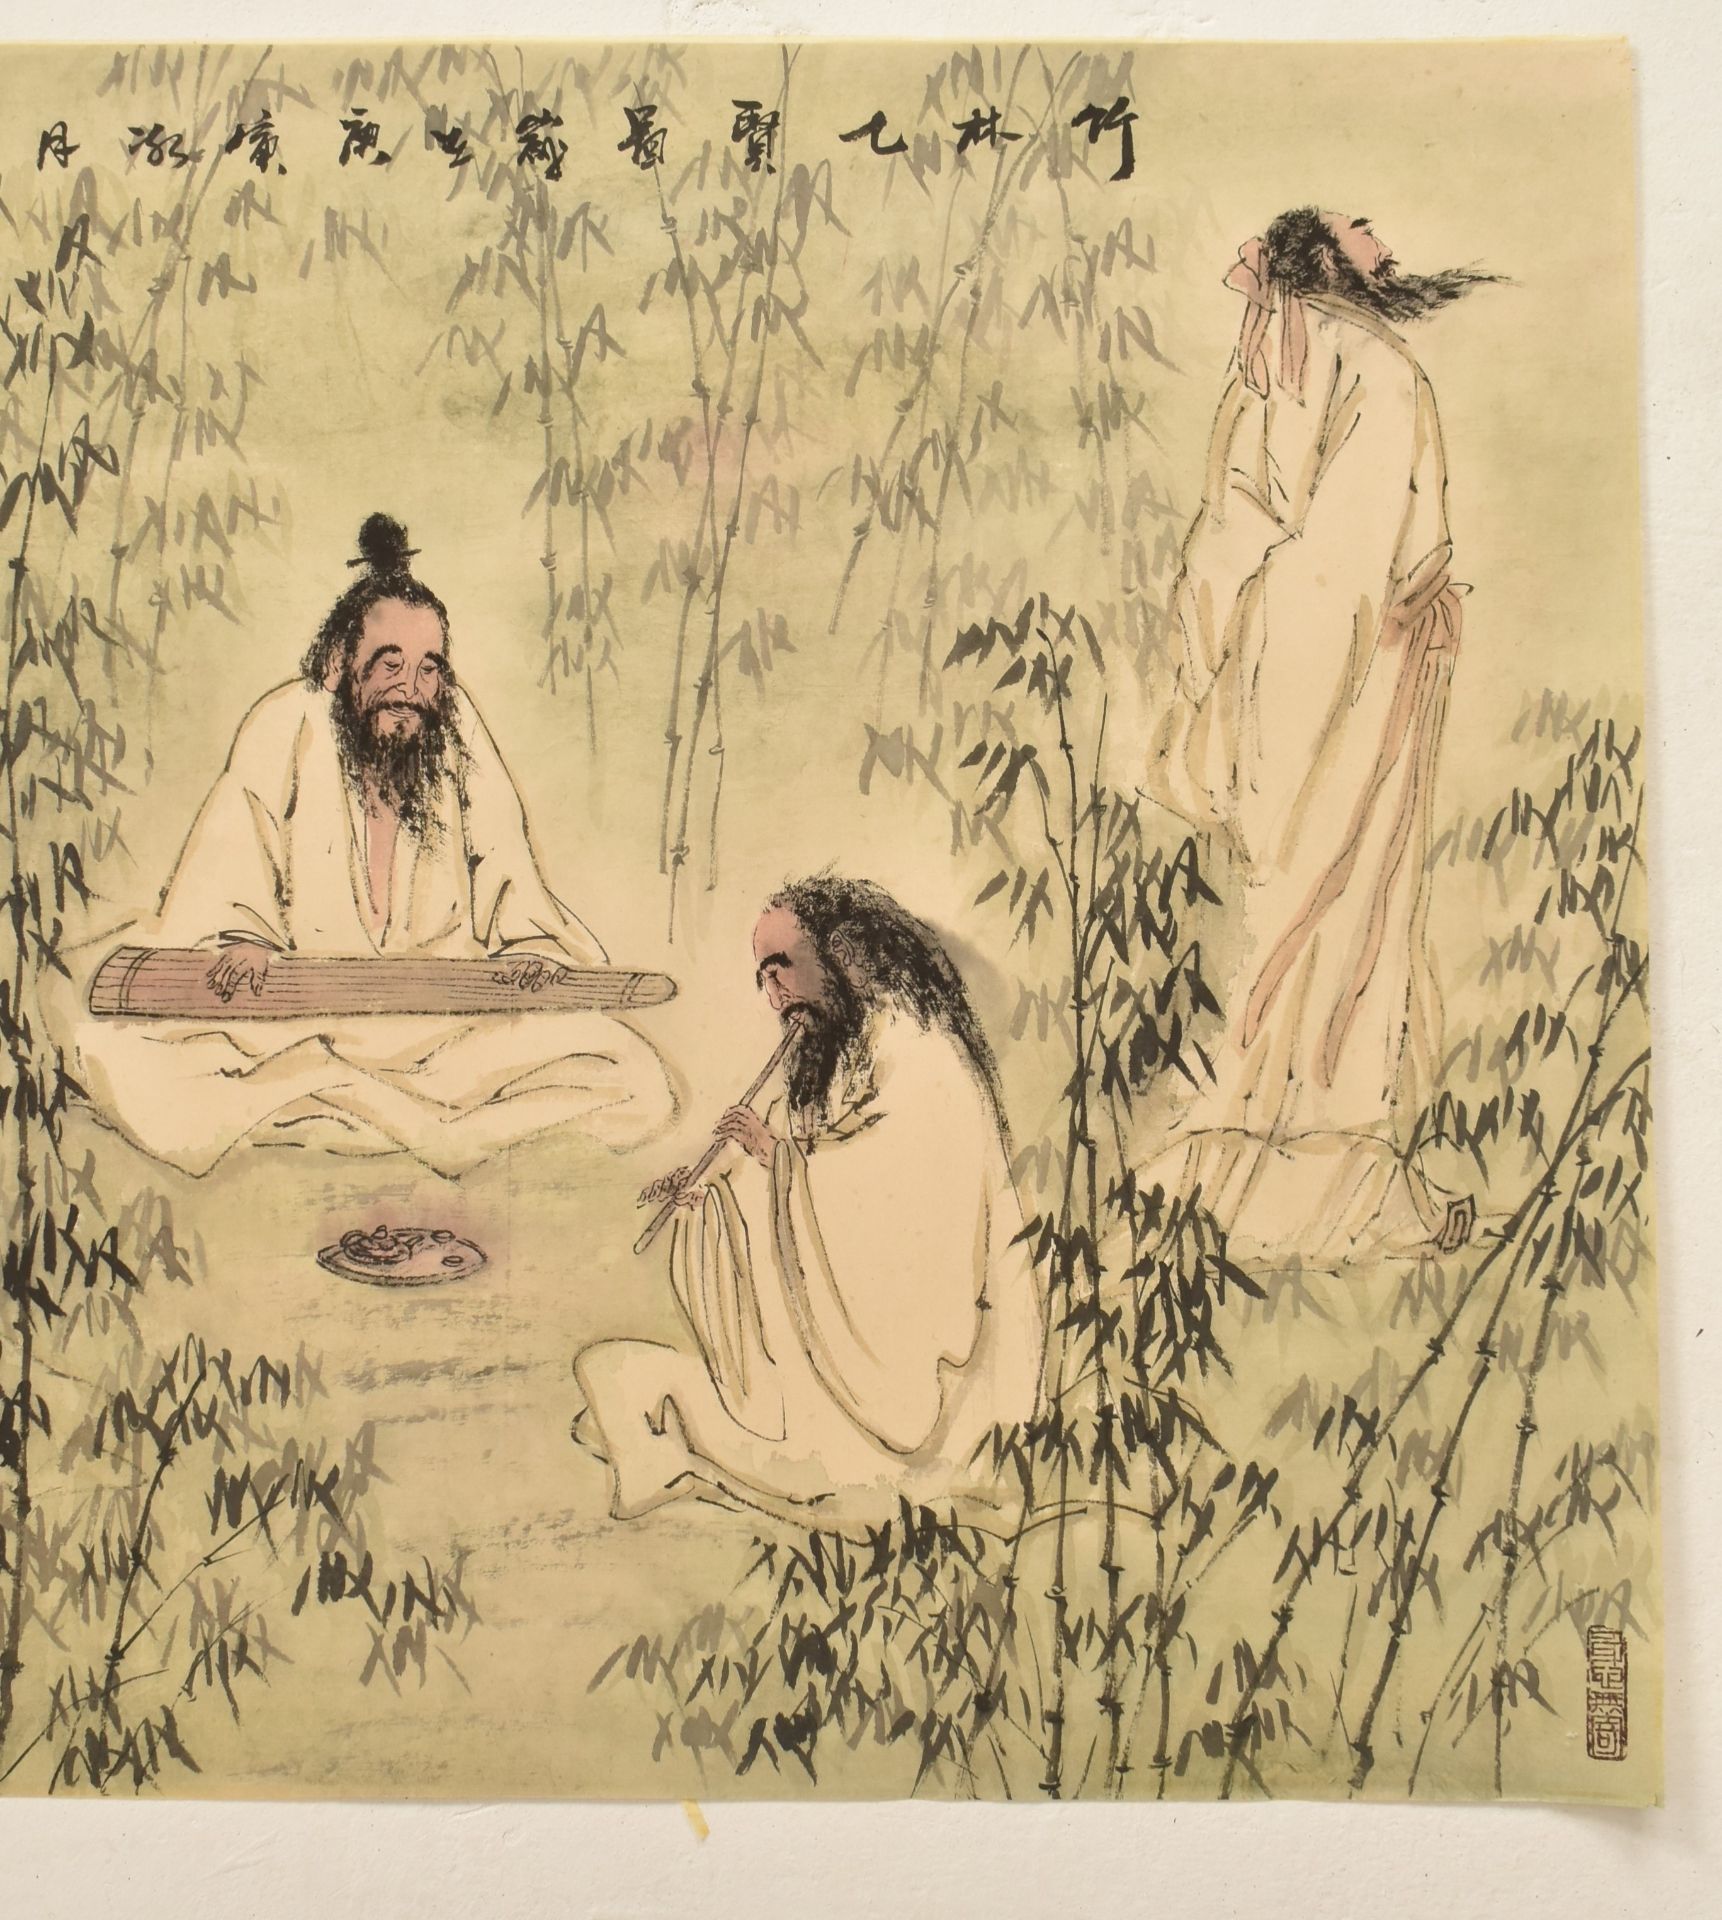 Liu Qidonf 刘其东 - THE SEVEN AGES OF THE BAMBOO GROVE 竹林七賢 - Image 2 of 6